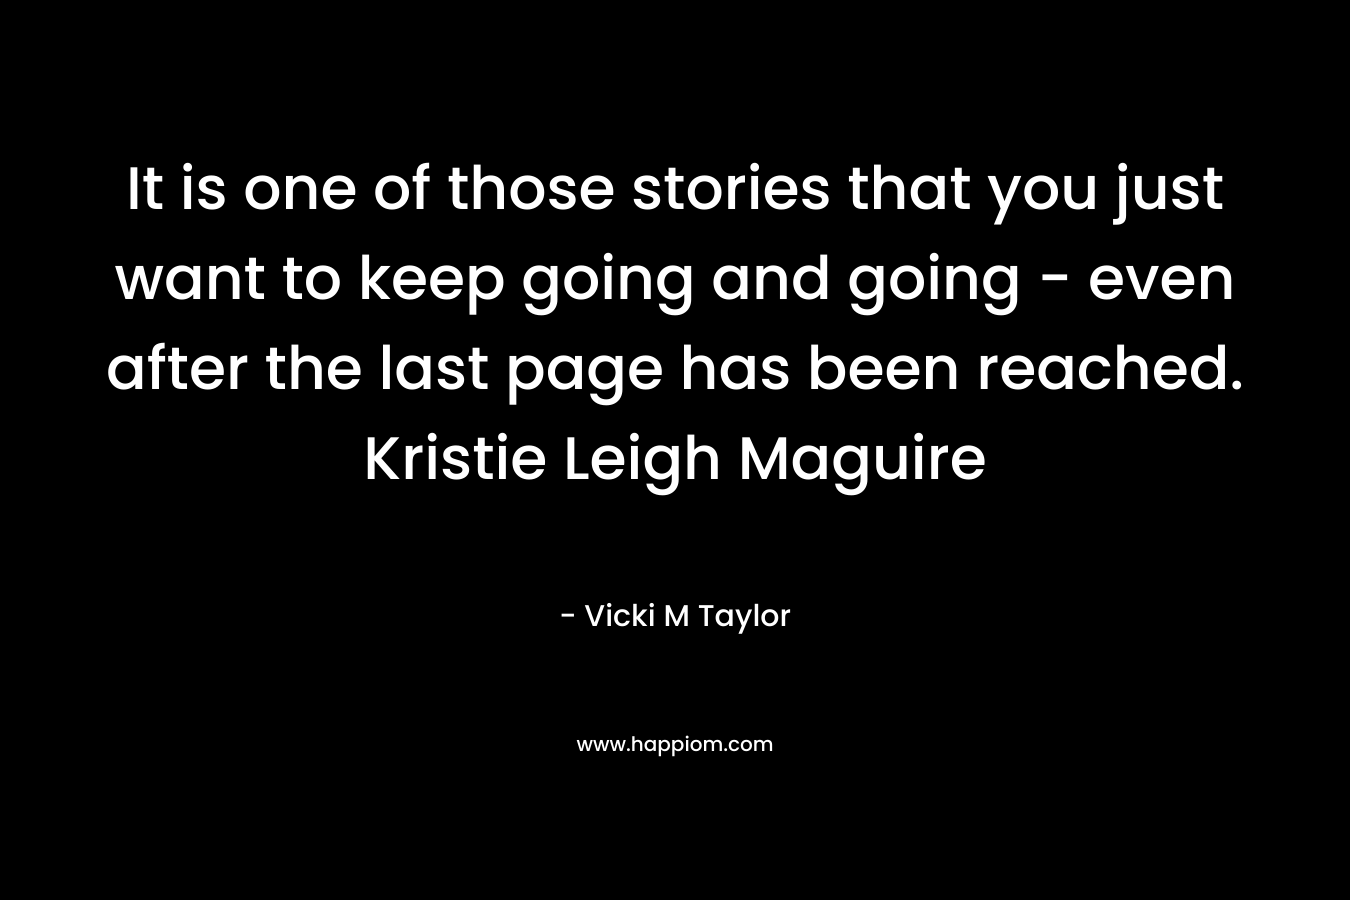 It is one of those stories that you just want to keep going and going - even after the last page has been reached. Kristie Leigh Maguire